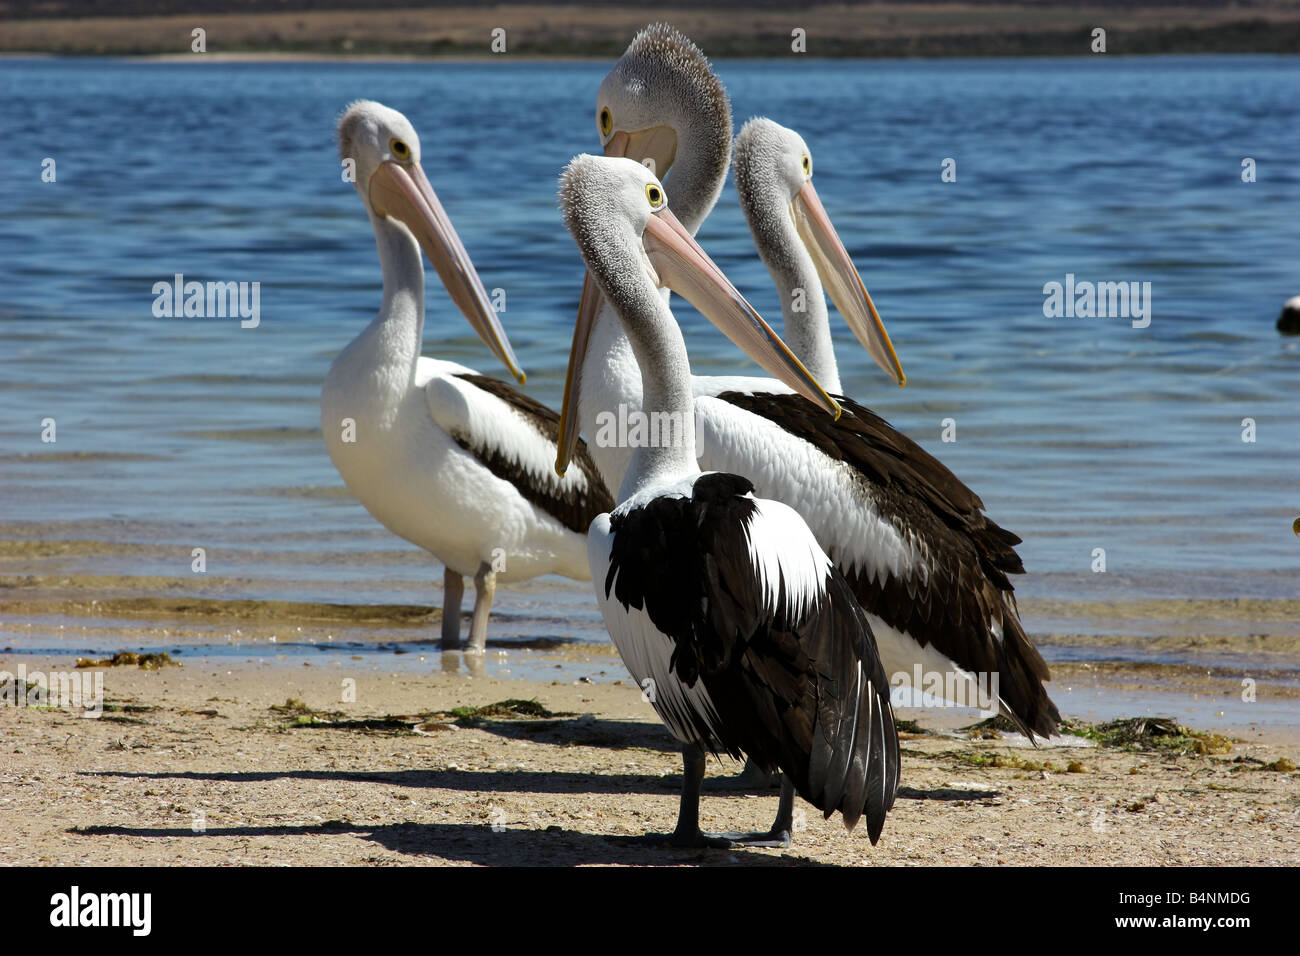 four pelicans on a beach on the west coast of south australia Stock Photo